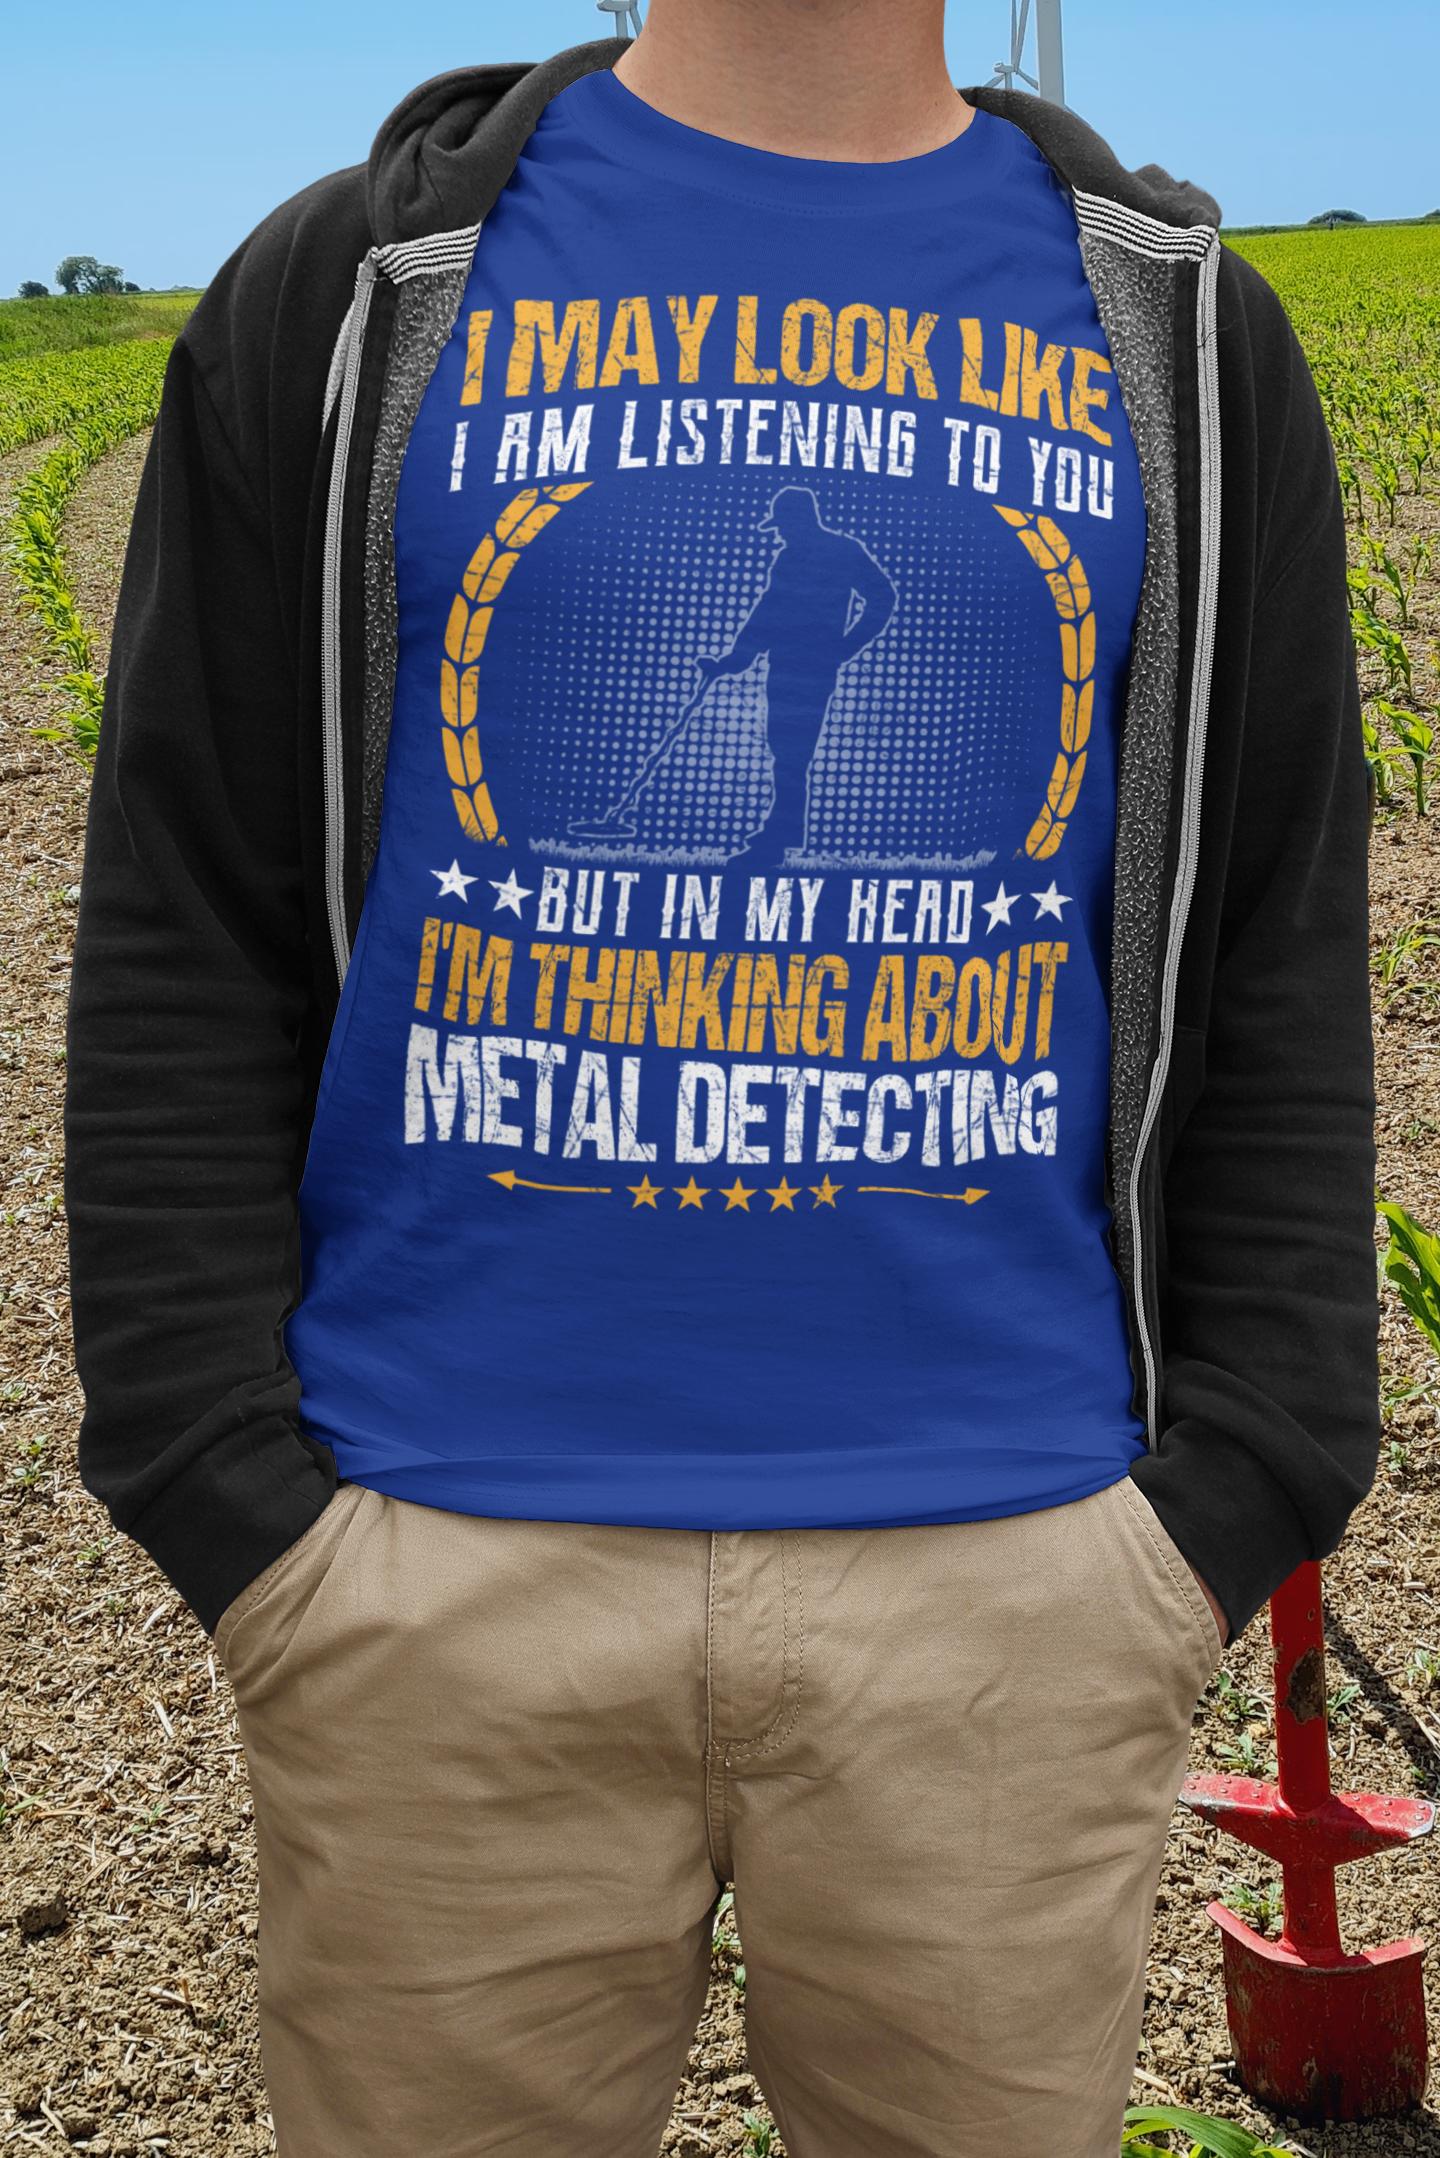 I may look like I am listening to you but in my head I'm thinking about metal detecting